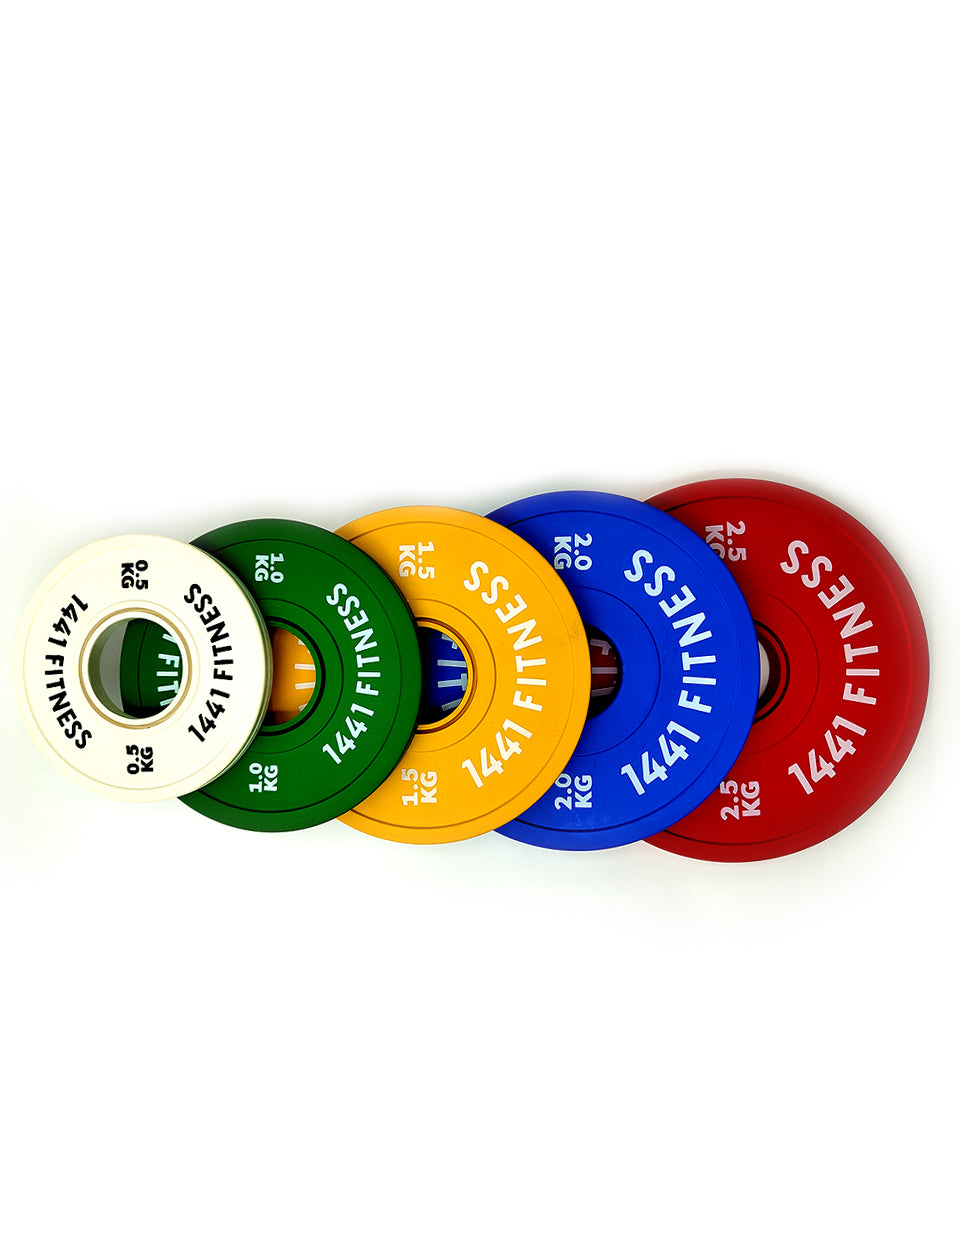 1441 Fitness Fractional Bumper Weight Plates 0.5 kg to 2.5 Kg (Sold as Per Piece)